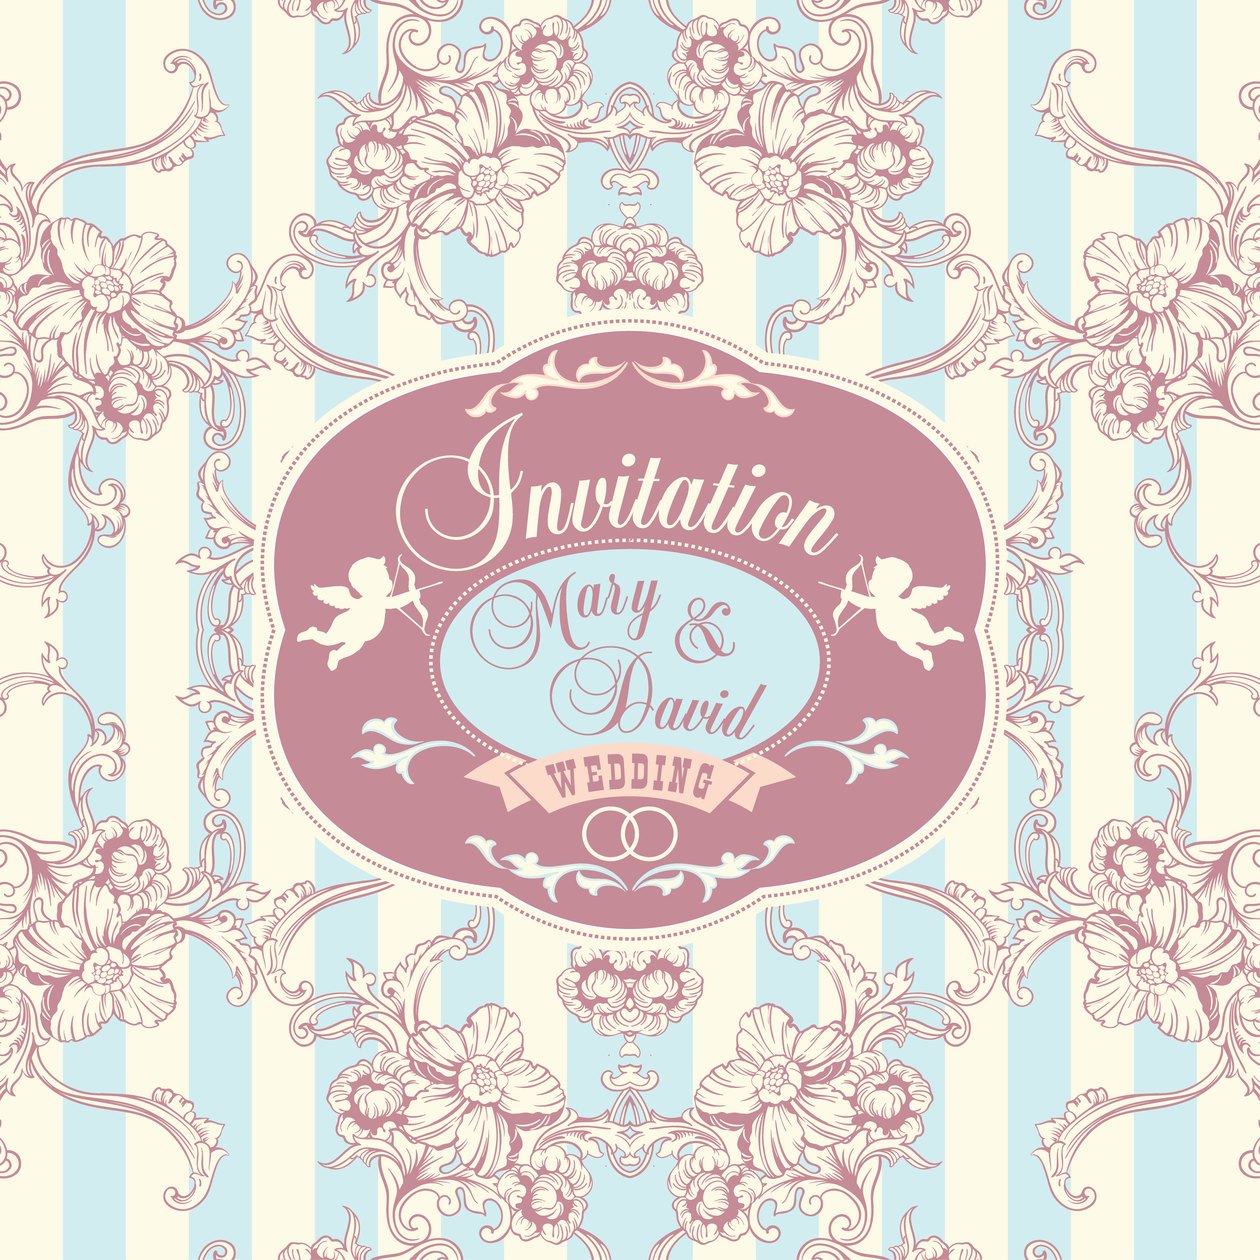 Wedding invitation cards with floral elements. Vector illustration. Photoshop brush